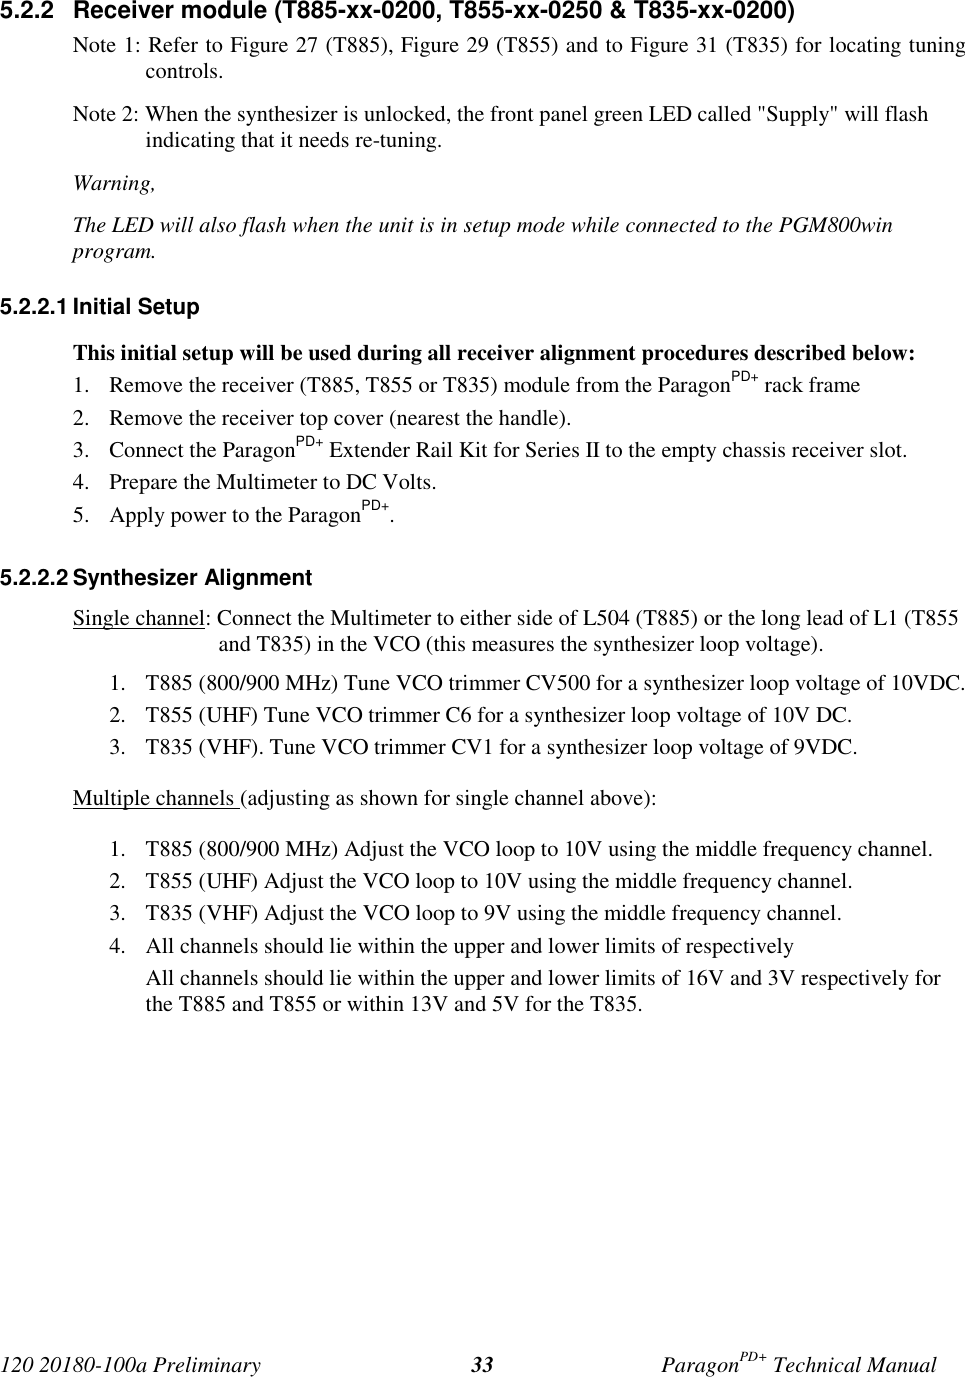 Page 40 of CalAmp Wireless Networks BDD4T85-1 Paragon/PD User Manual Parg PD  T100a Prelim